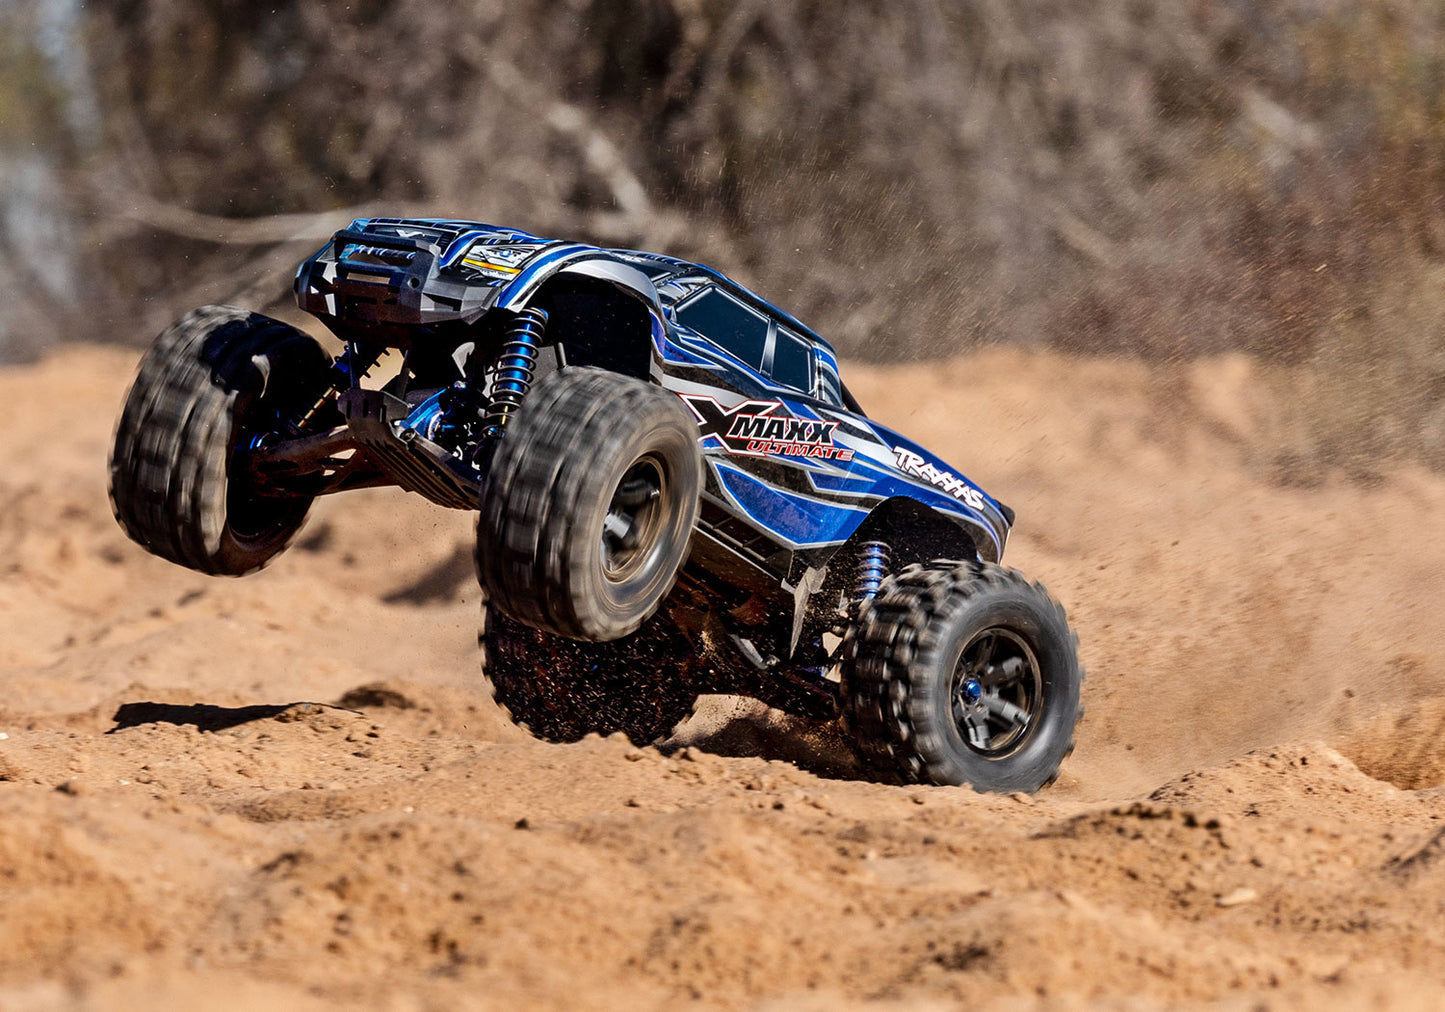 TRAXXAS 77097-4 BLUE X-Maxx 8S Ultimate EDITION AVAILABLE IN STORES ONLY